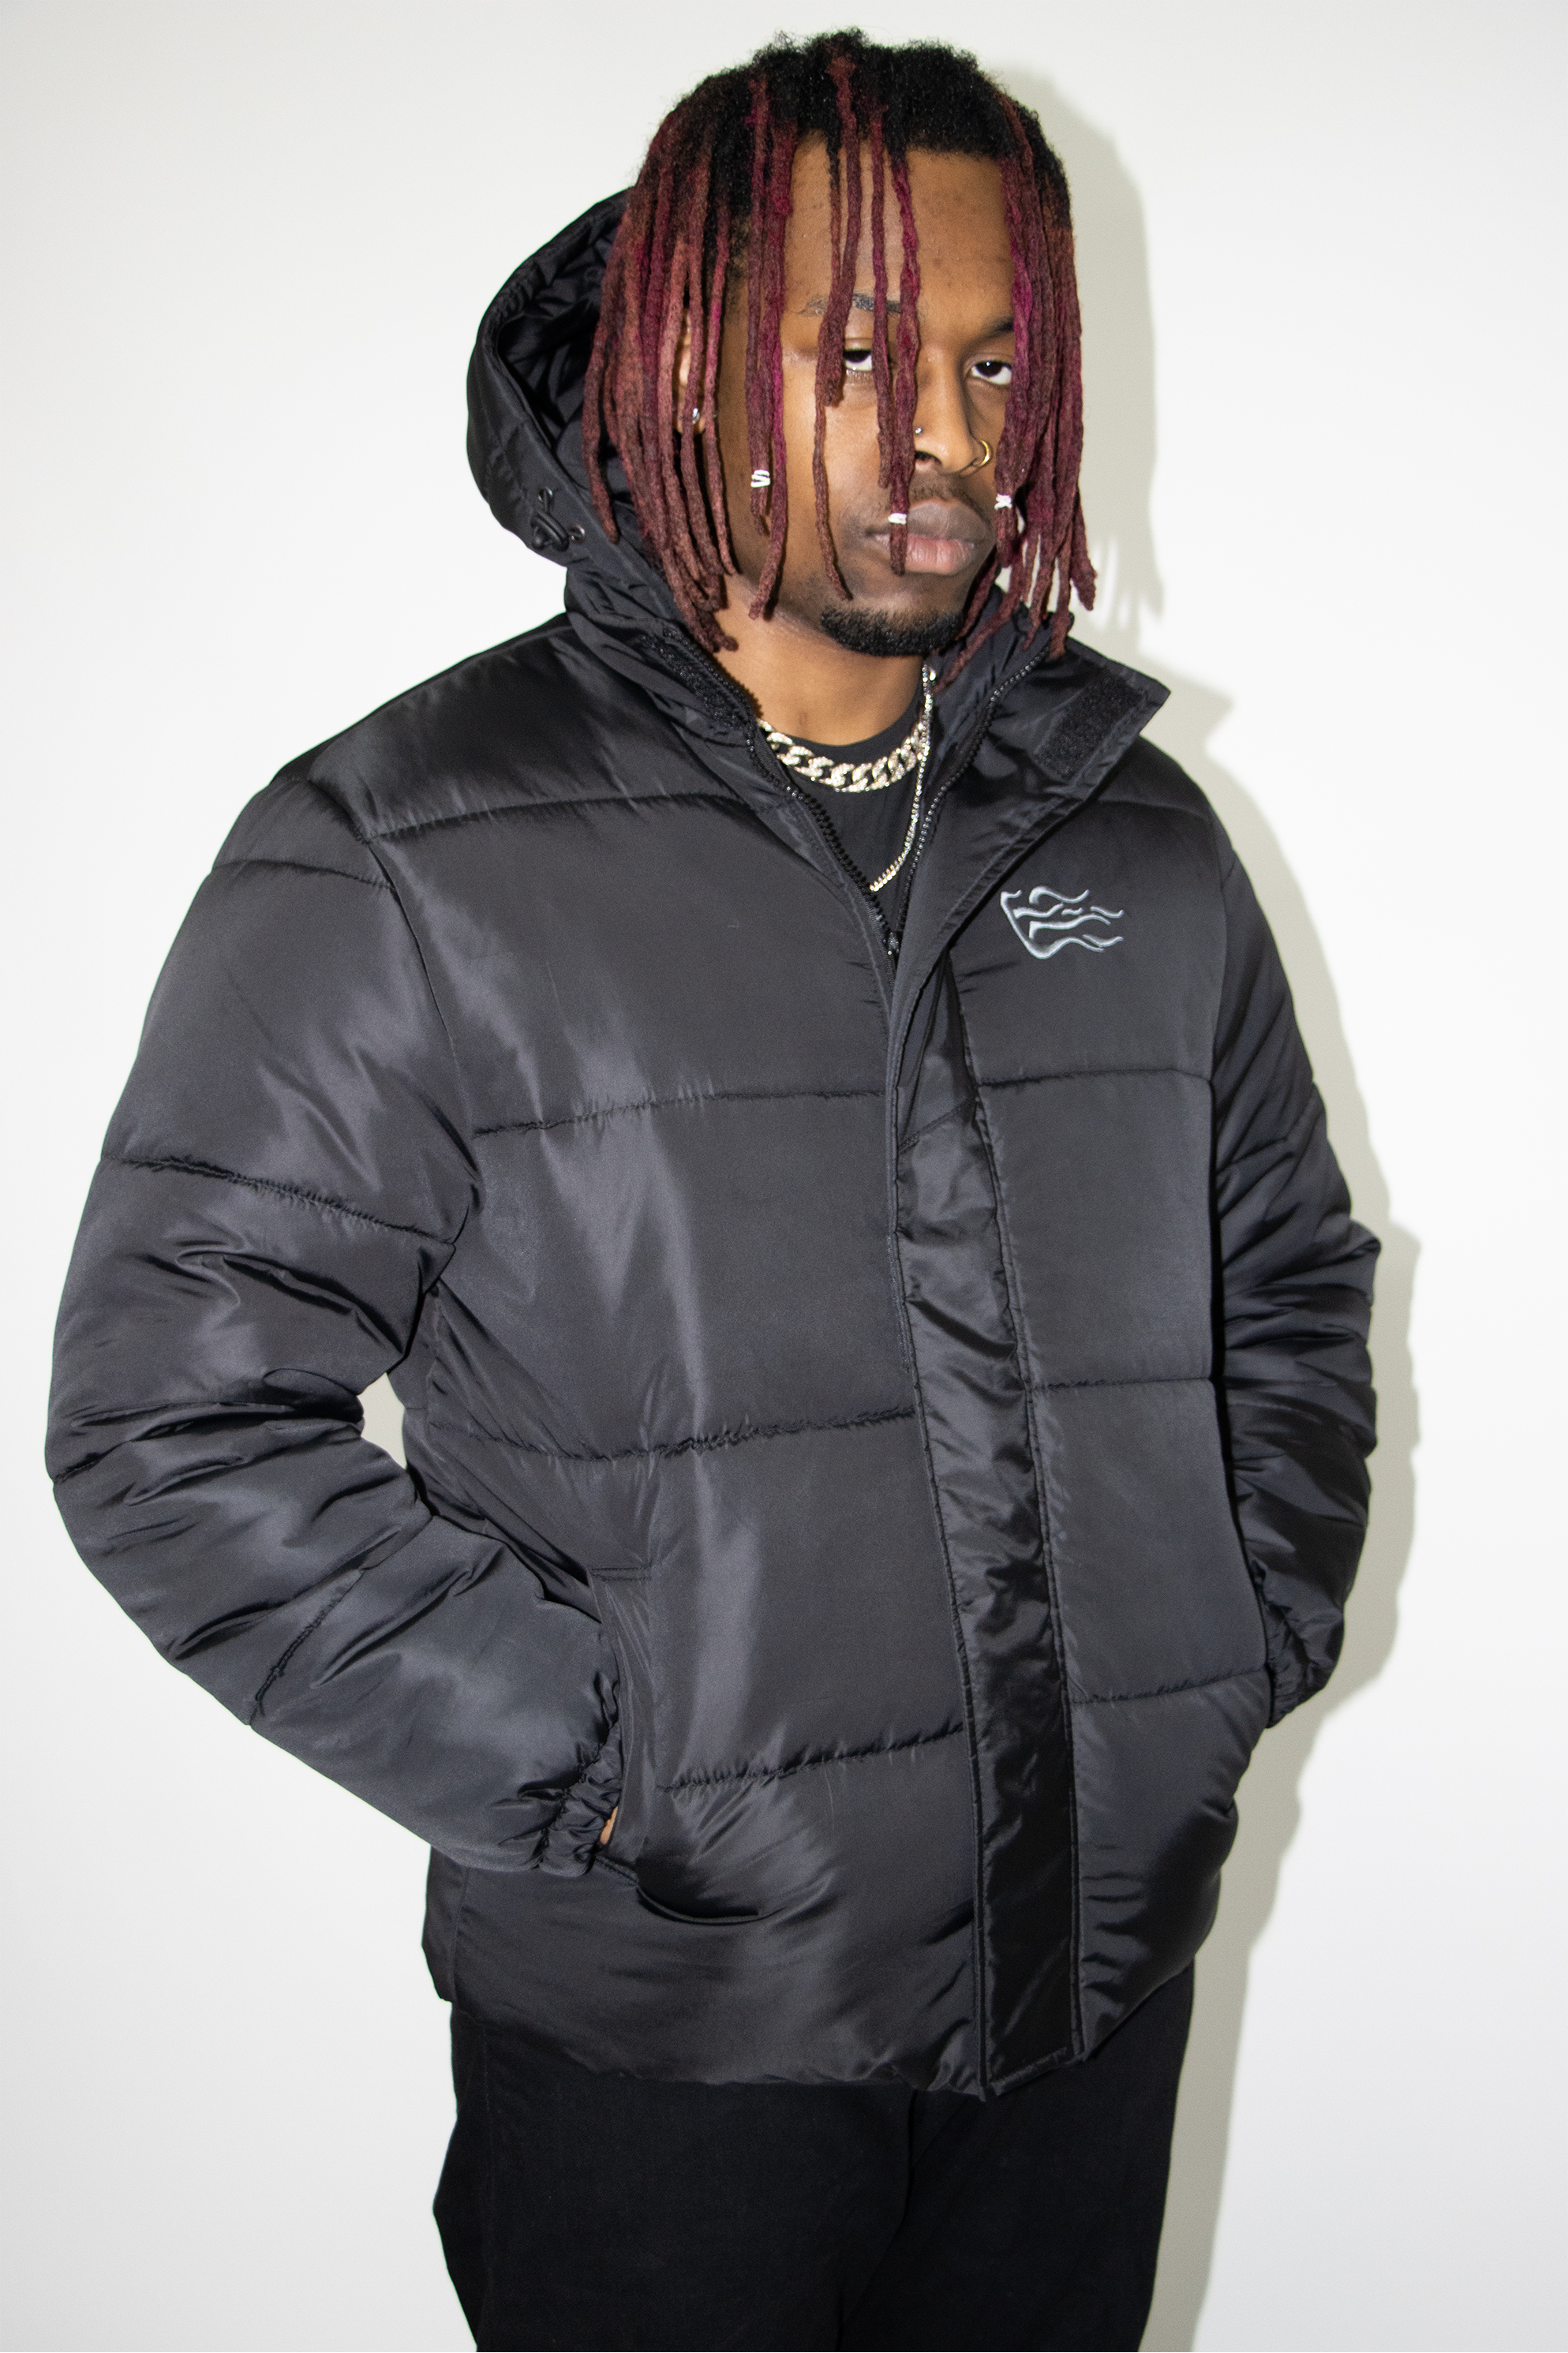 Blackout V-Logo Embroidery  Puffer